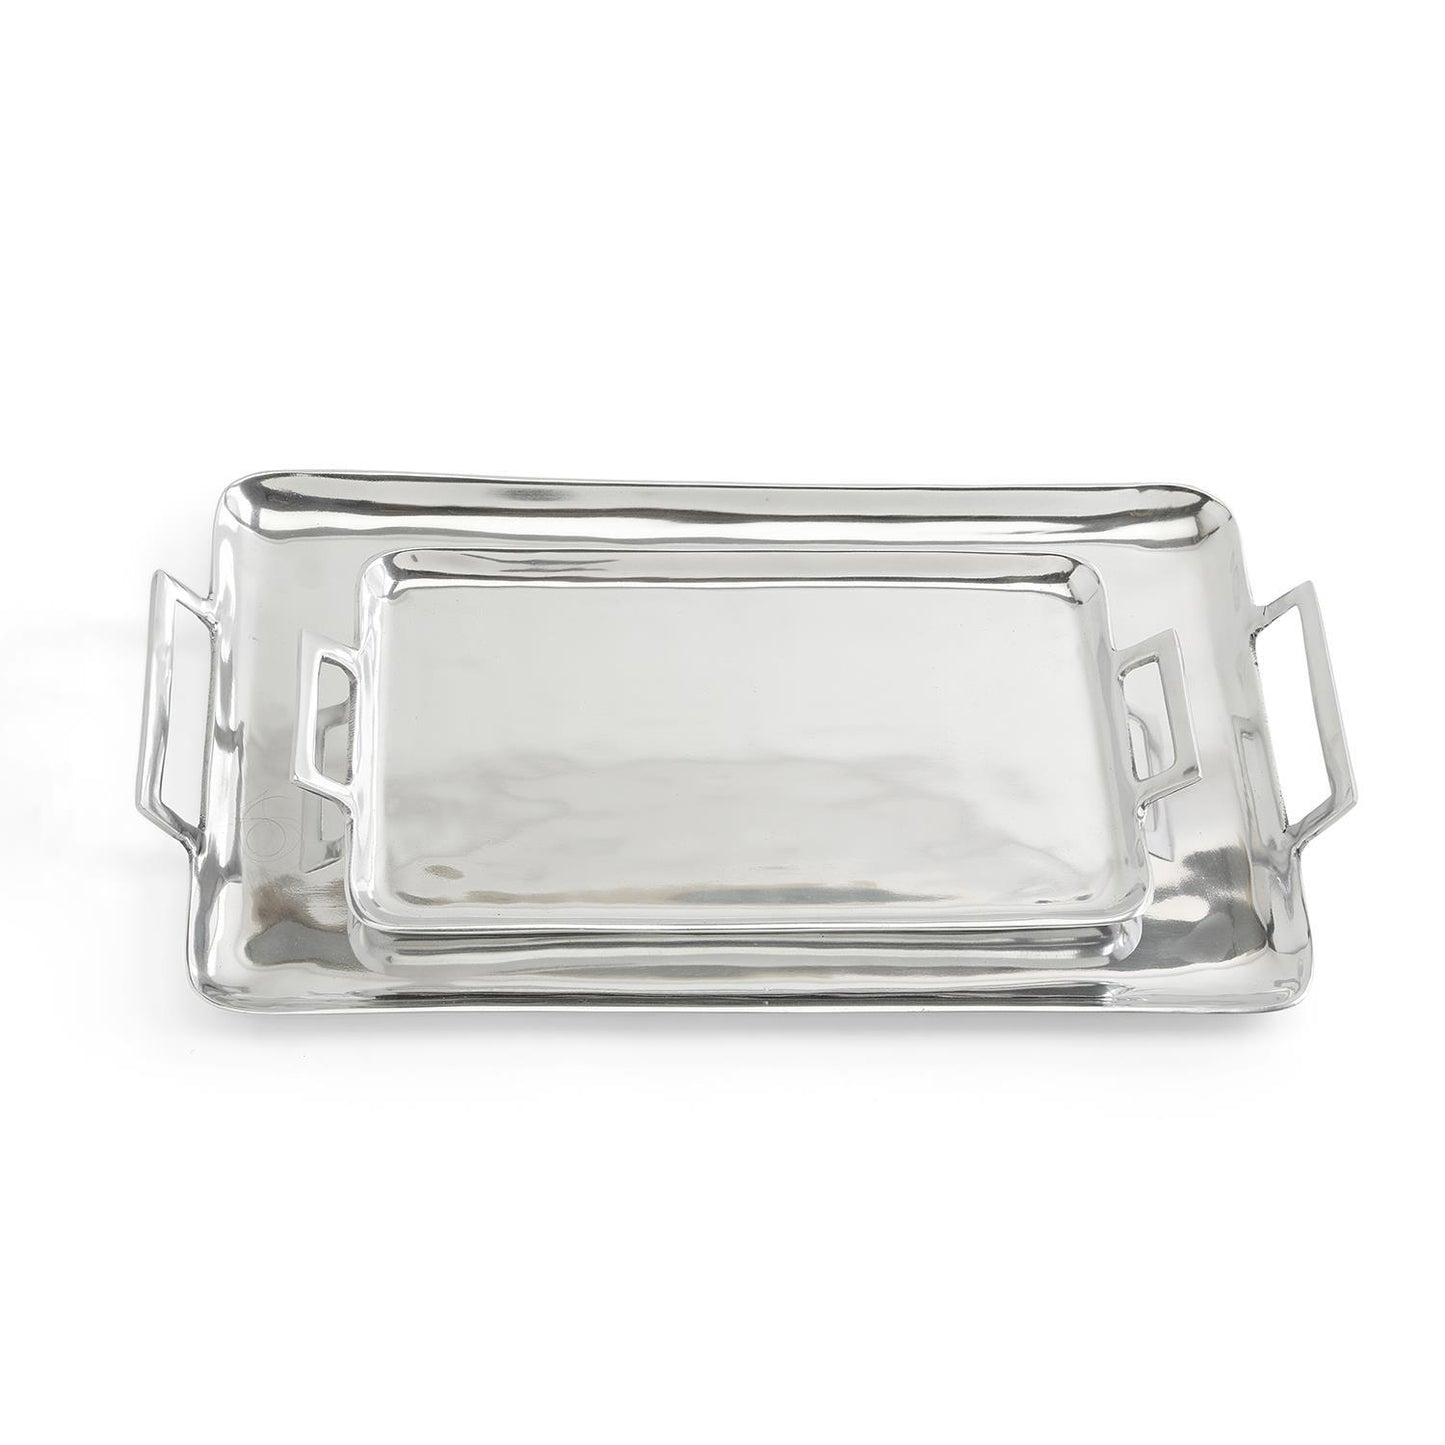 CRILLION HIGH POLISHED SILVER TRAY WITH HANDLES